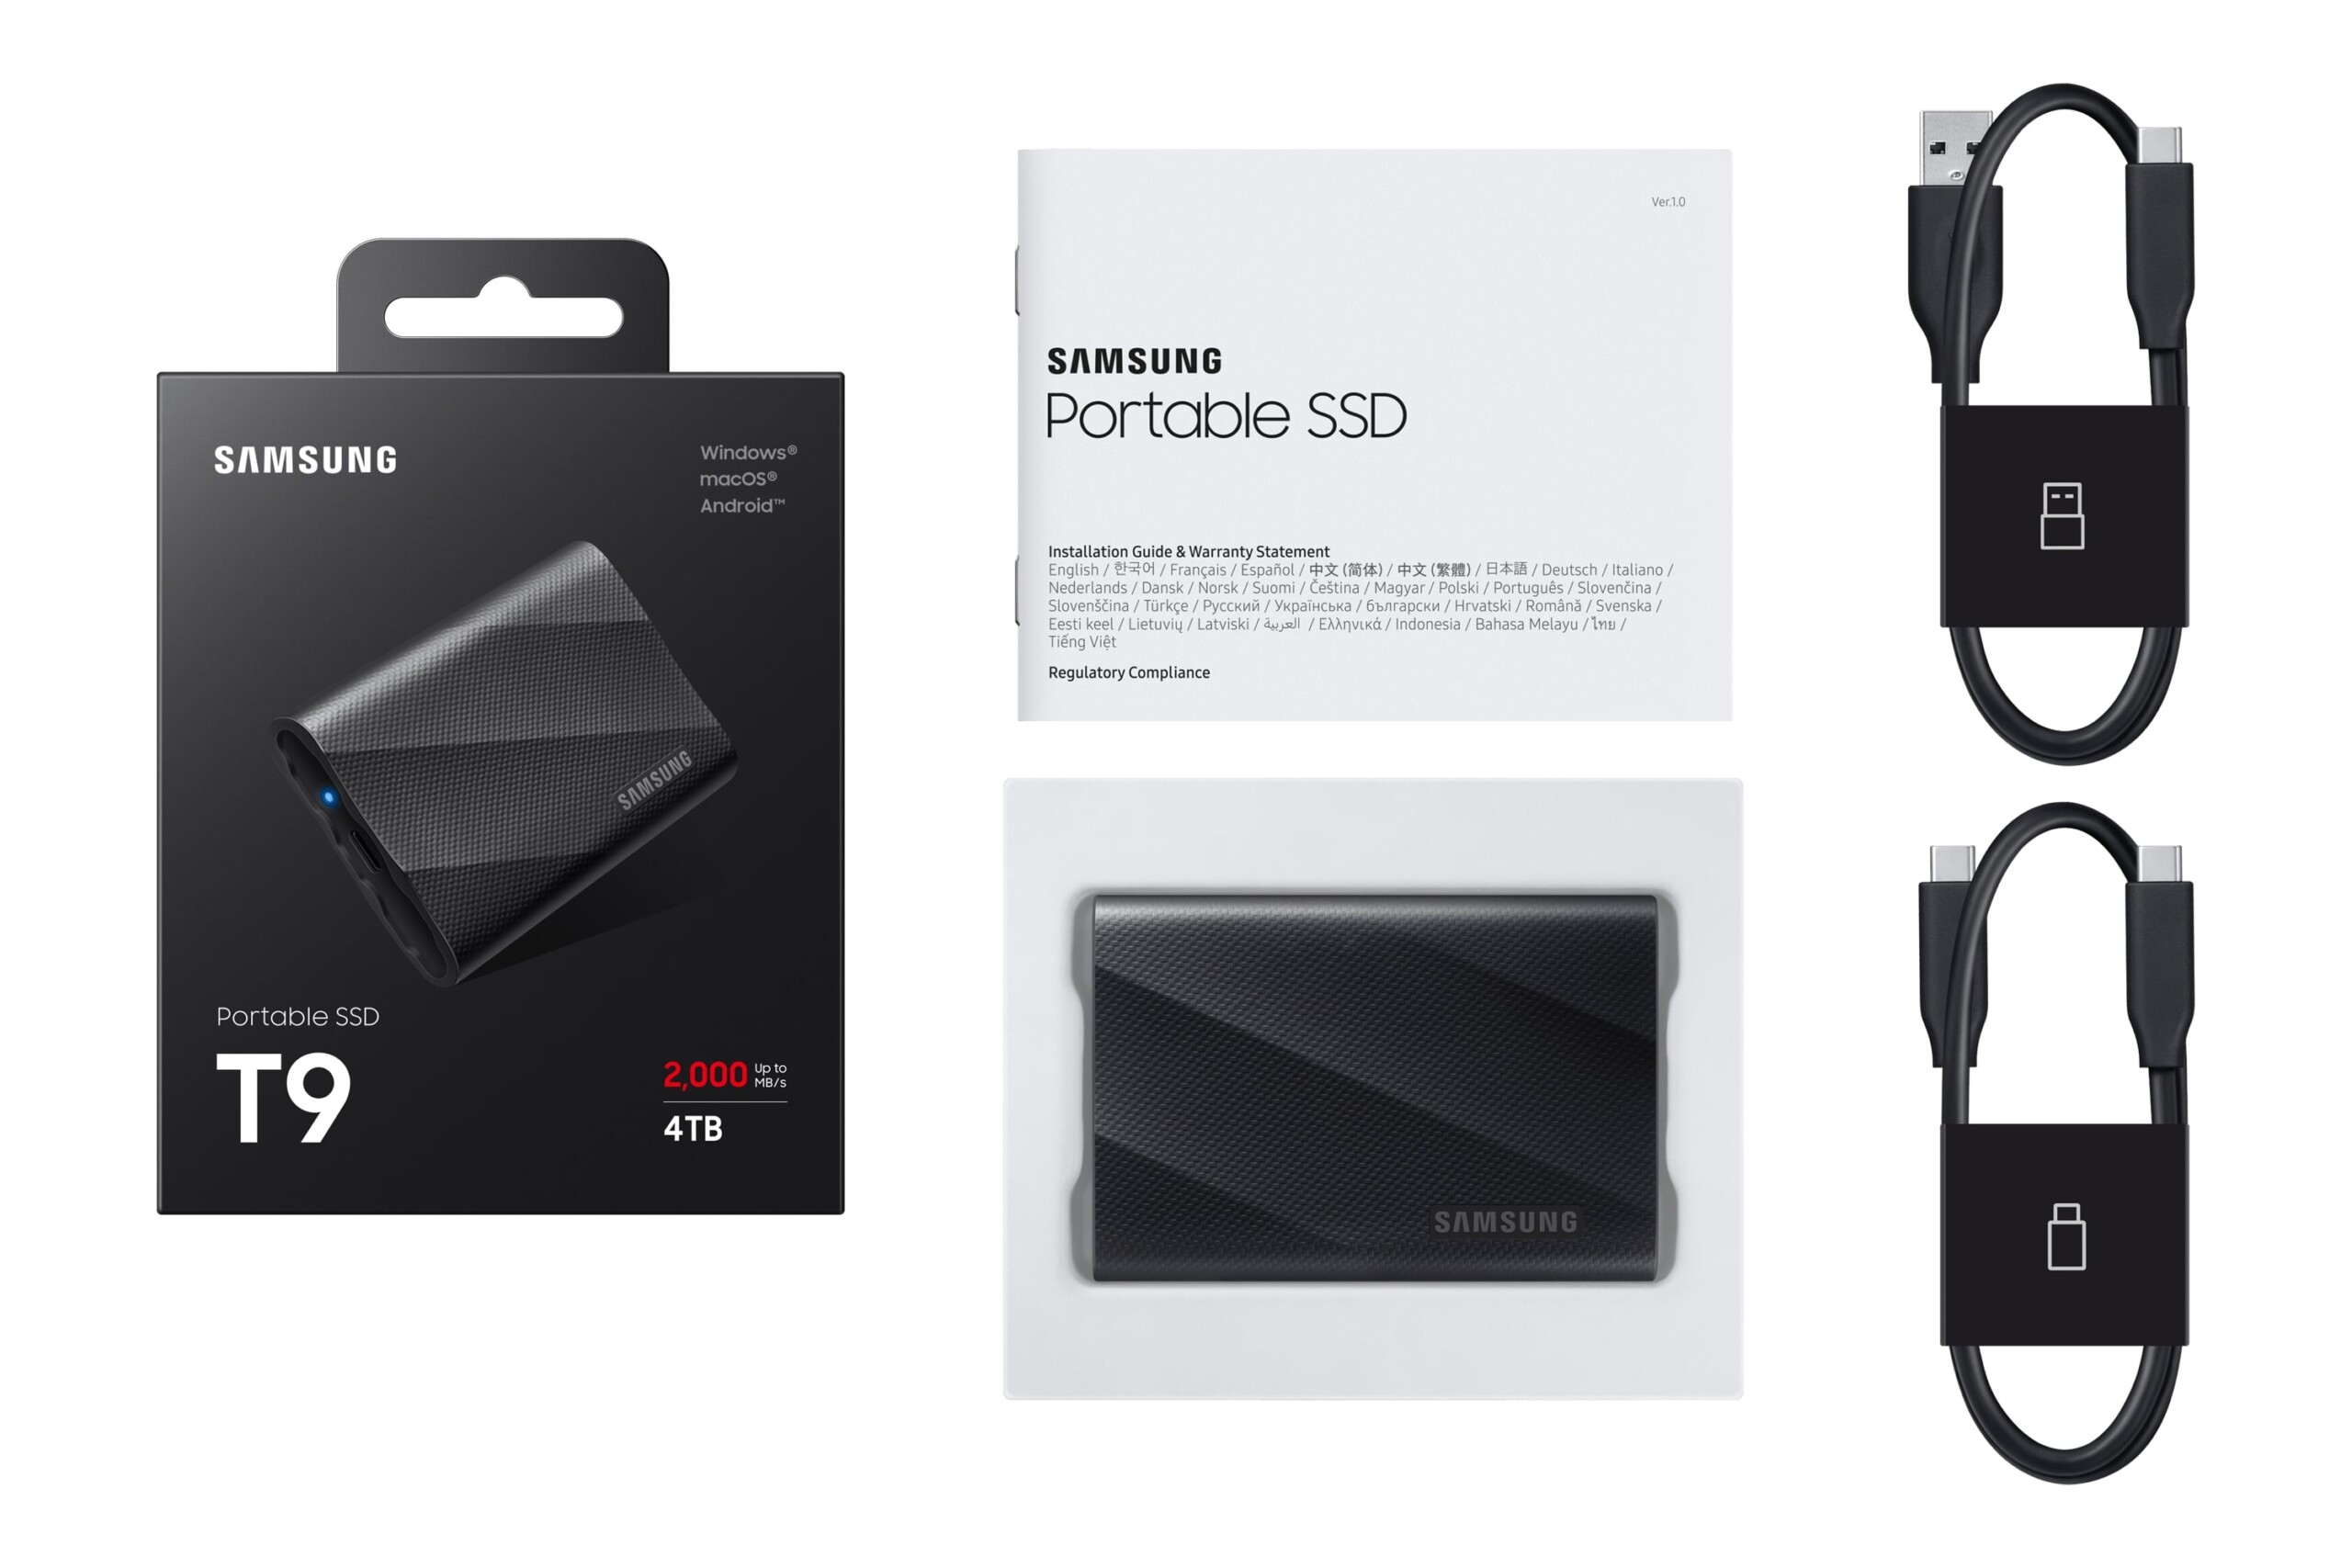 Samsung Portable Solid State Drive (SSD) T9